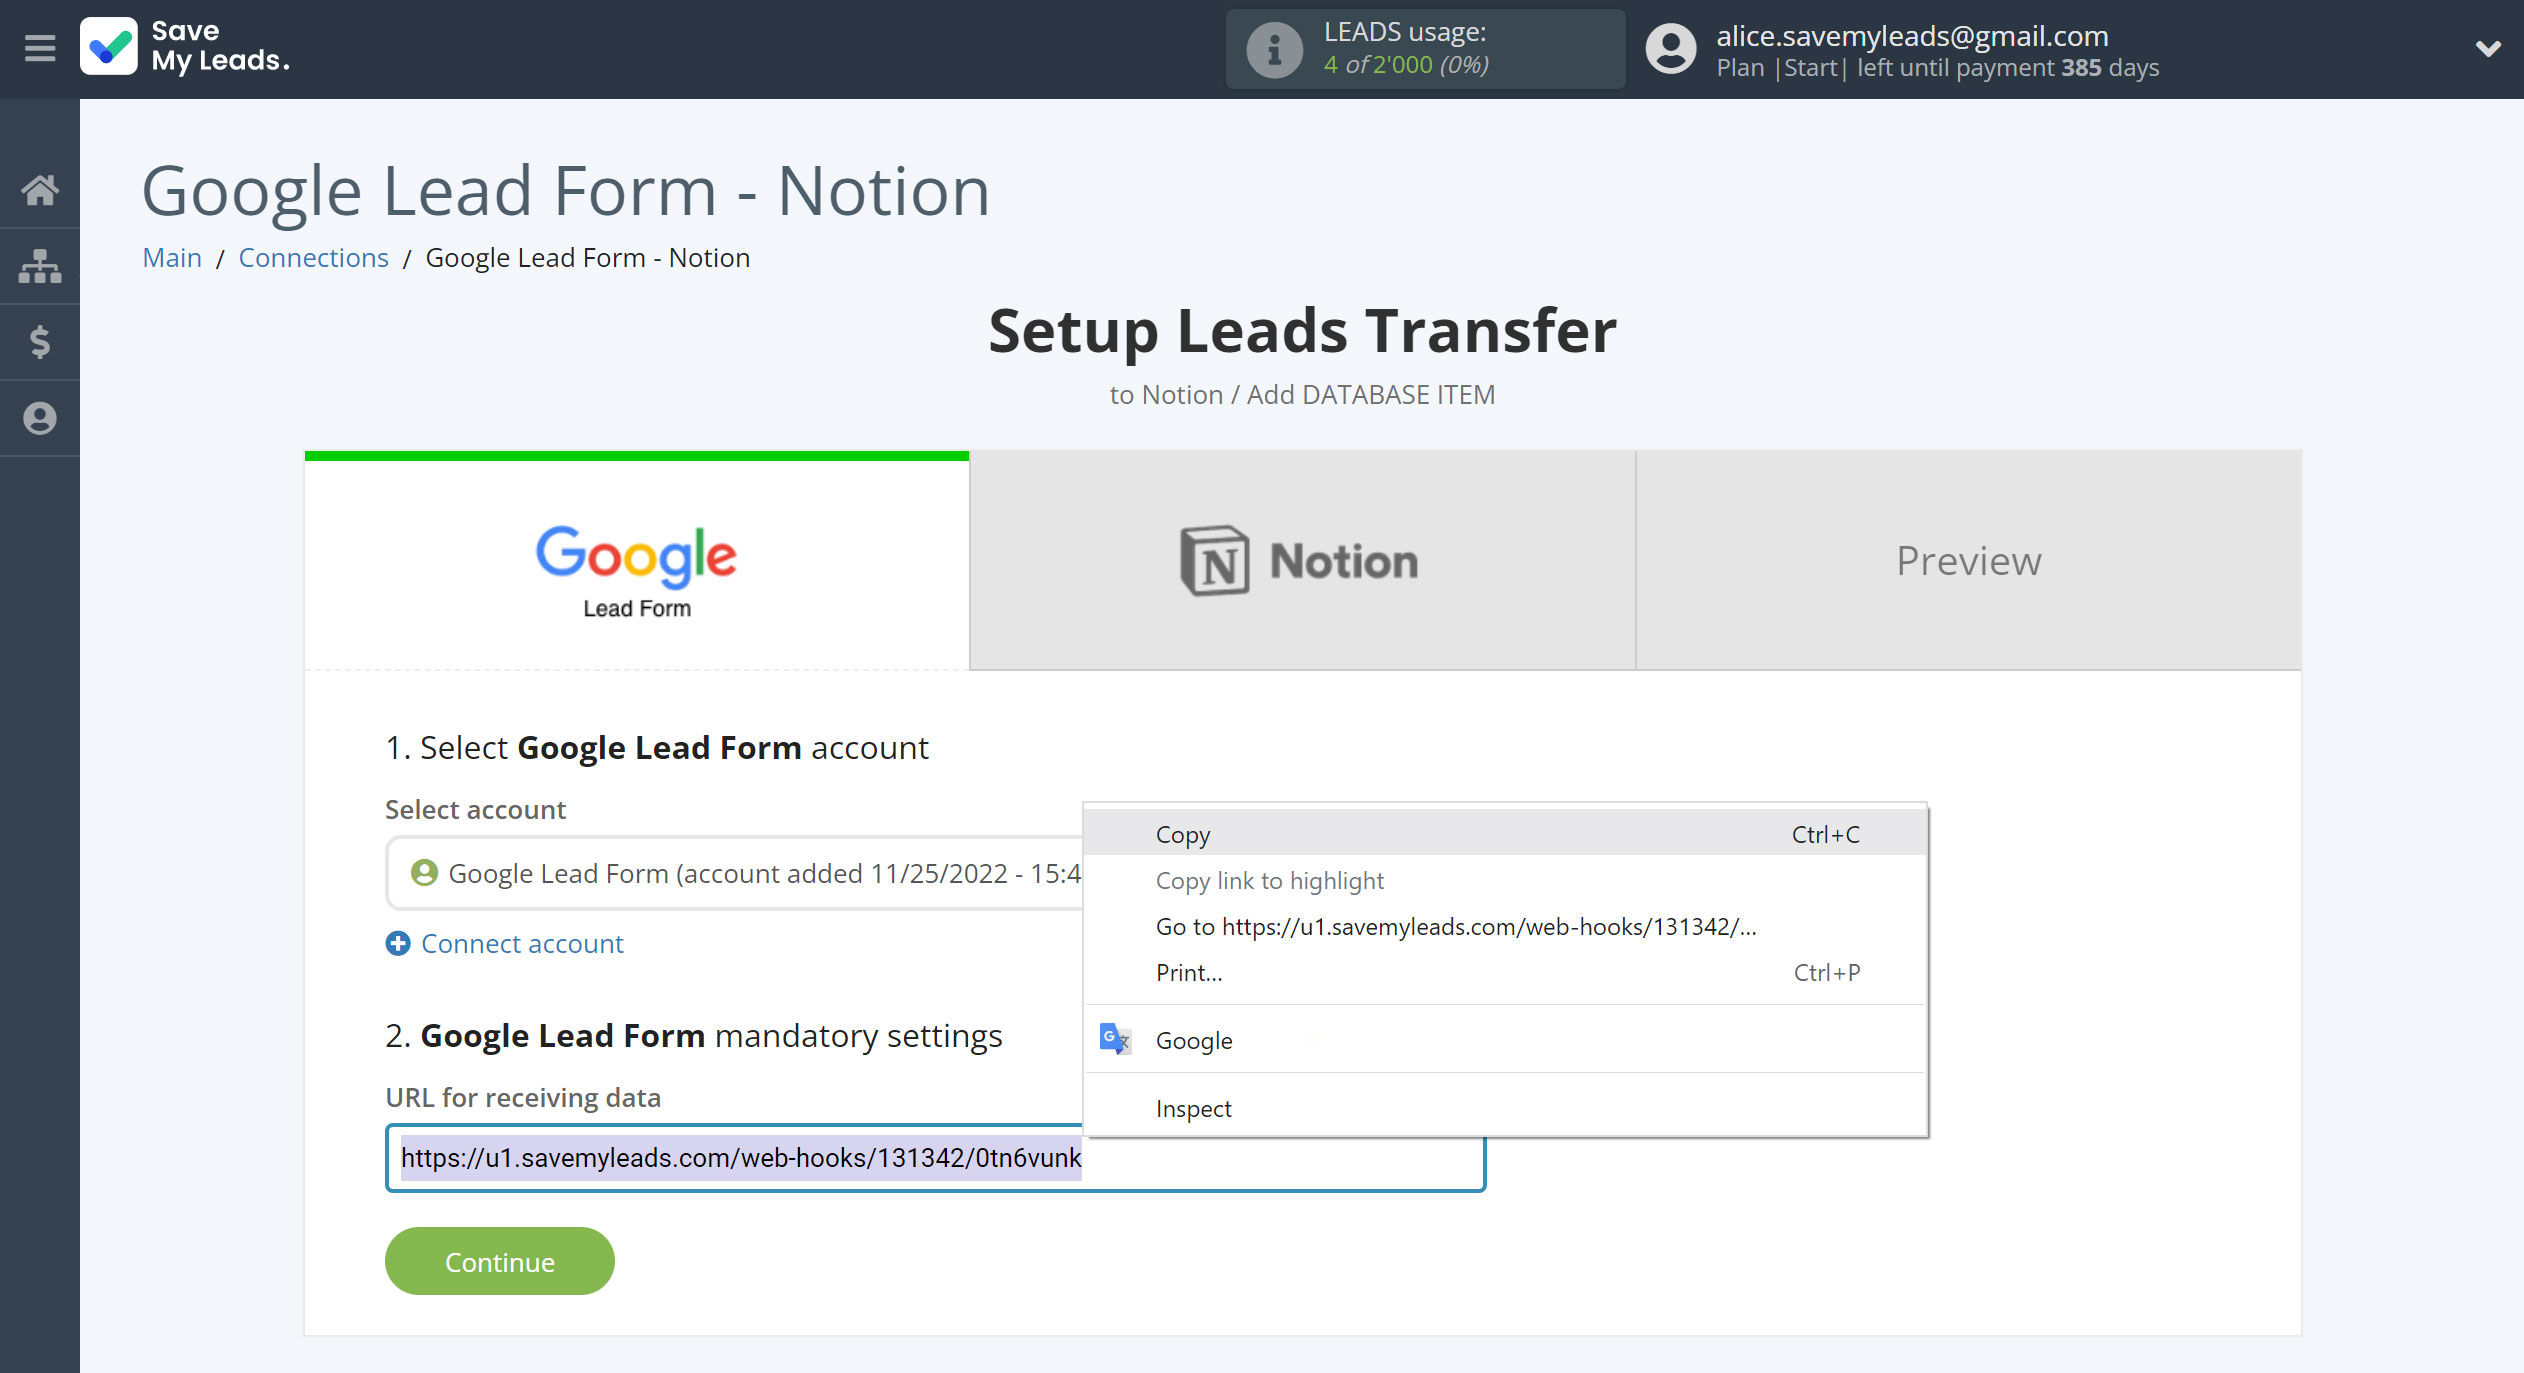 How to Connect Google Lead Form with Notion | Data Source account connection